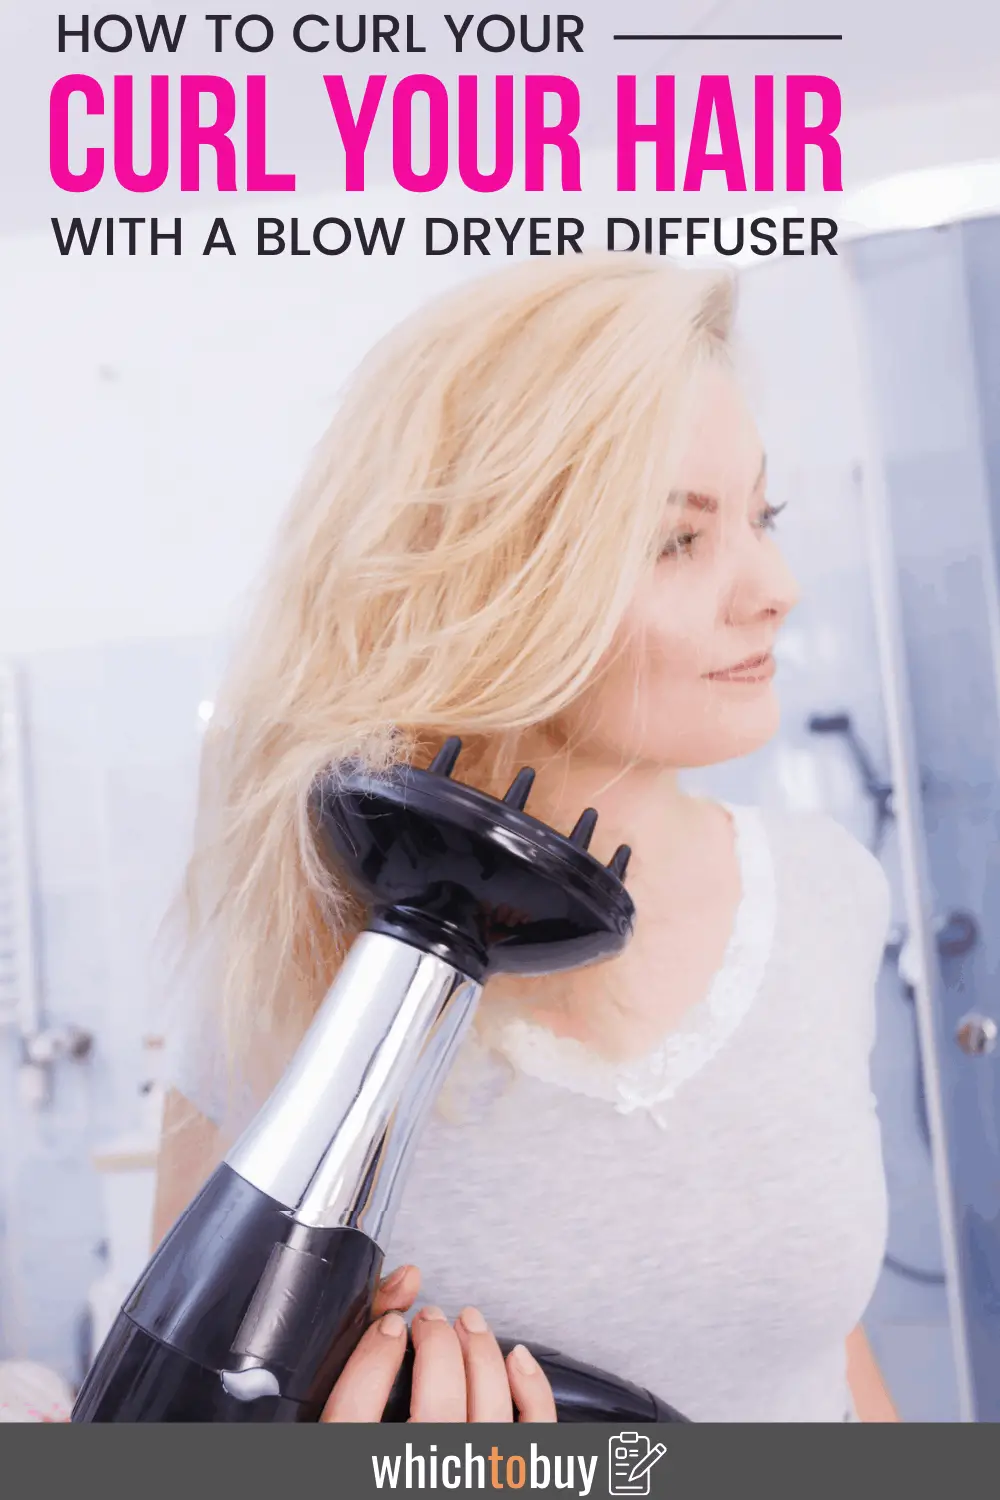 How to Curl Your Hair With a Blow Dryer Diffuser 6 Steps to a